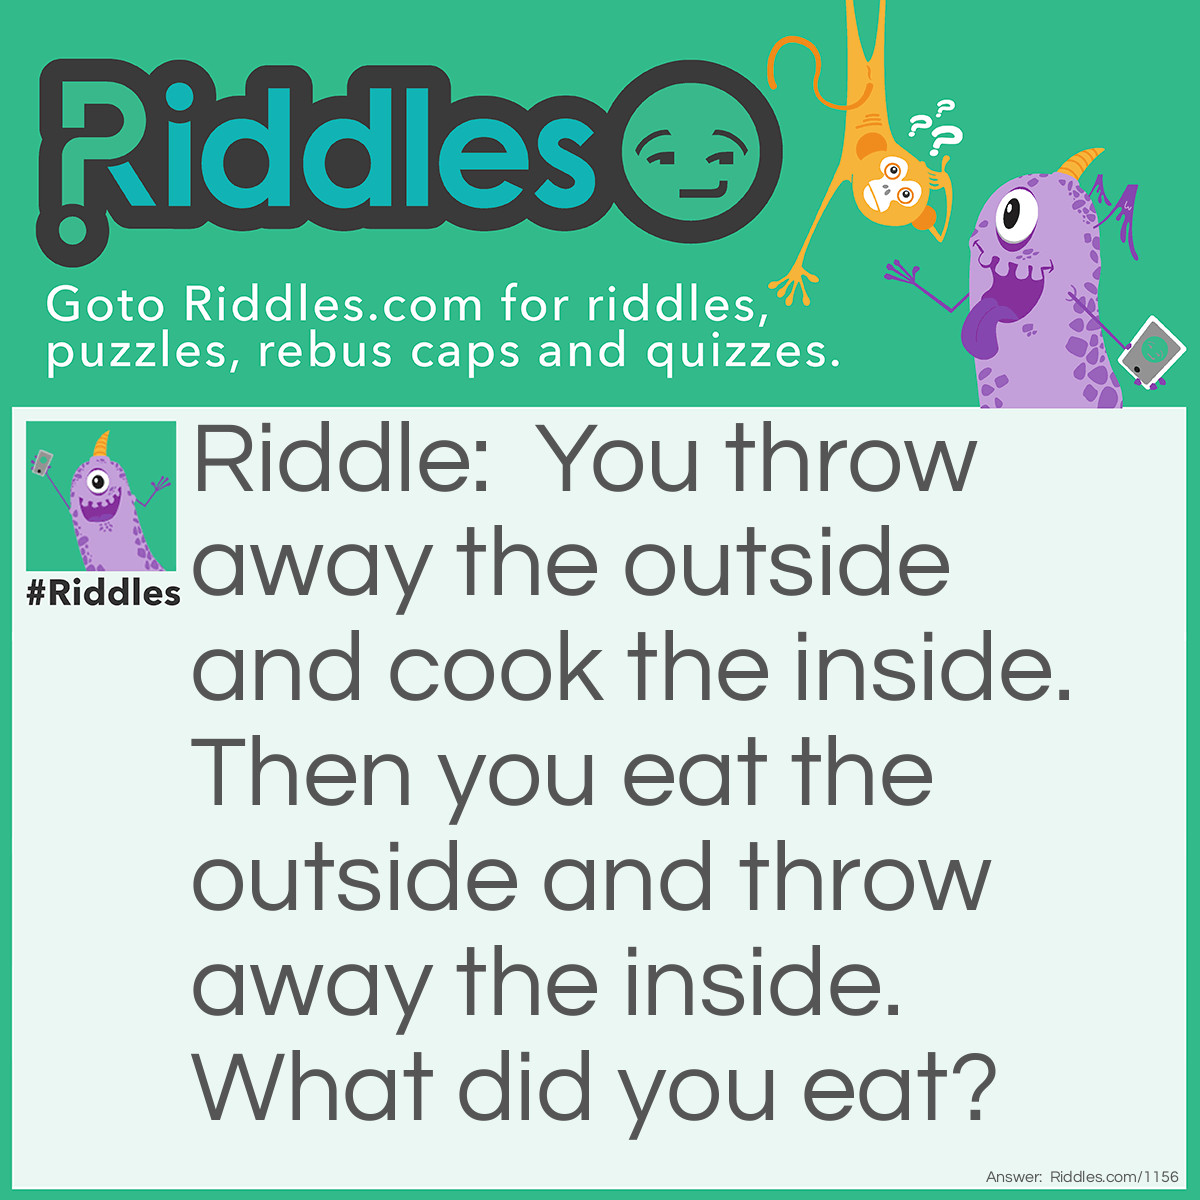 Riddle: You throw away the outside and cook the inside. Then you eat the outside and throw away the inside.
What did you eat? Answer: corn on the cob